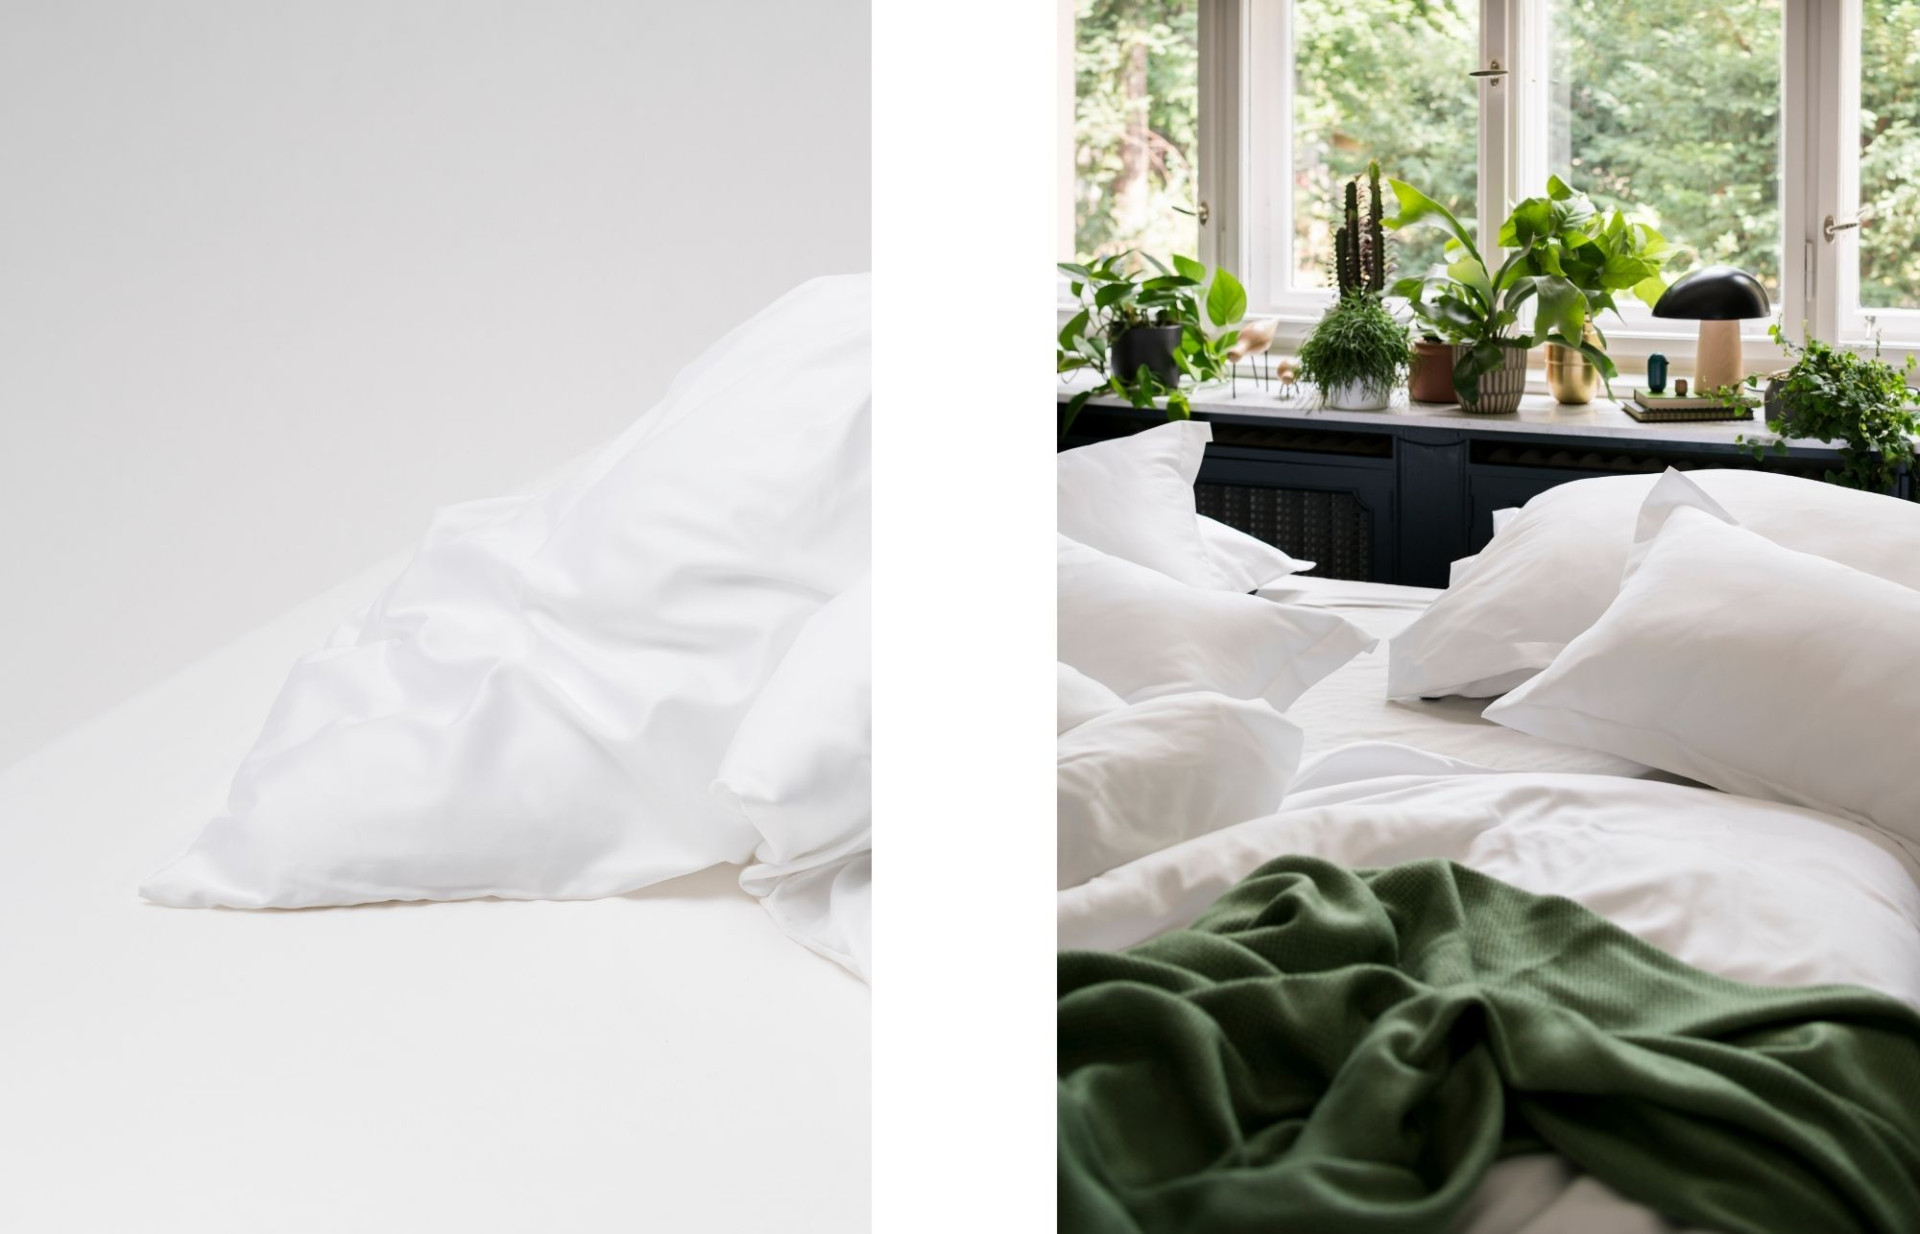 Turn your bedding inside out before you place it into the dryer and always use a gentle care and low heat setting. 